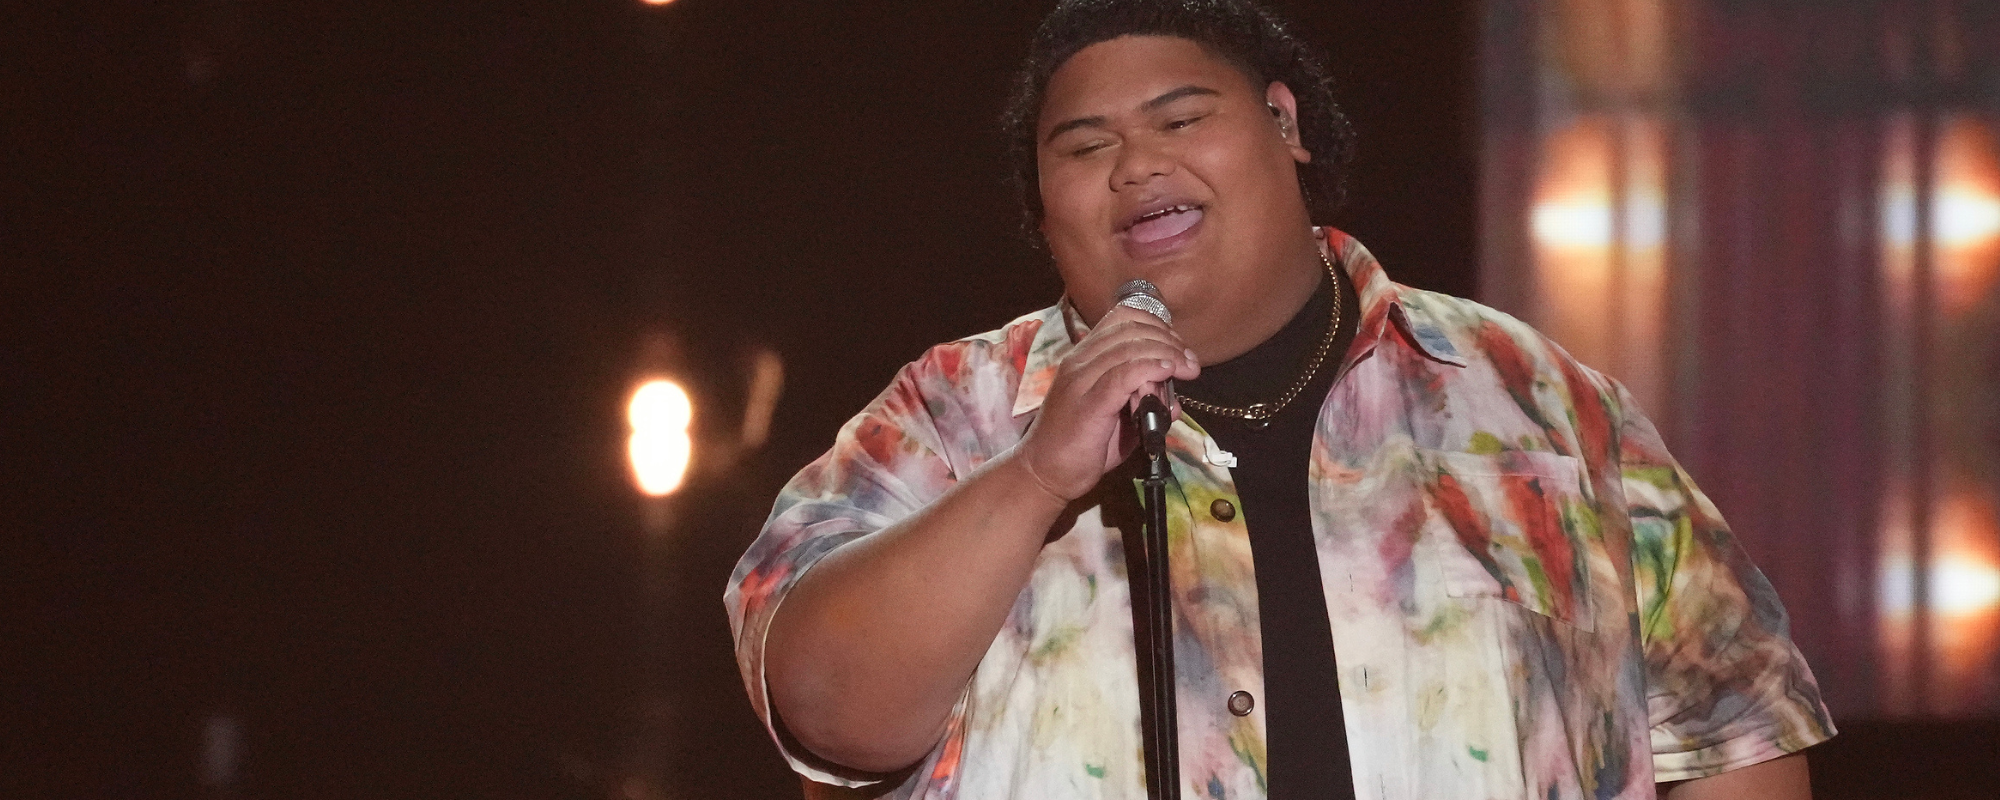 Iam Tongi Reaches the Top 10 on ‘American Idol’ with “Bring It on Home to Me”